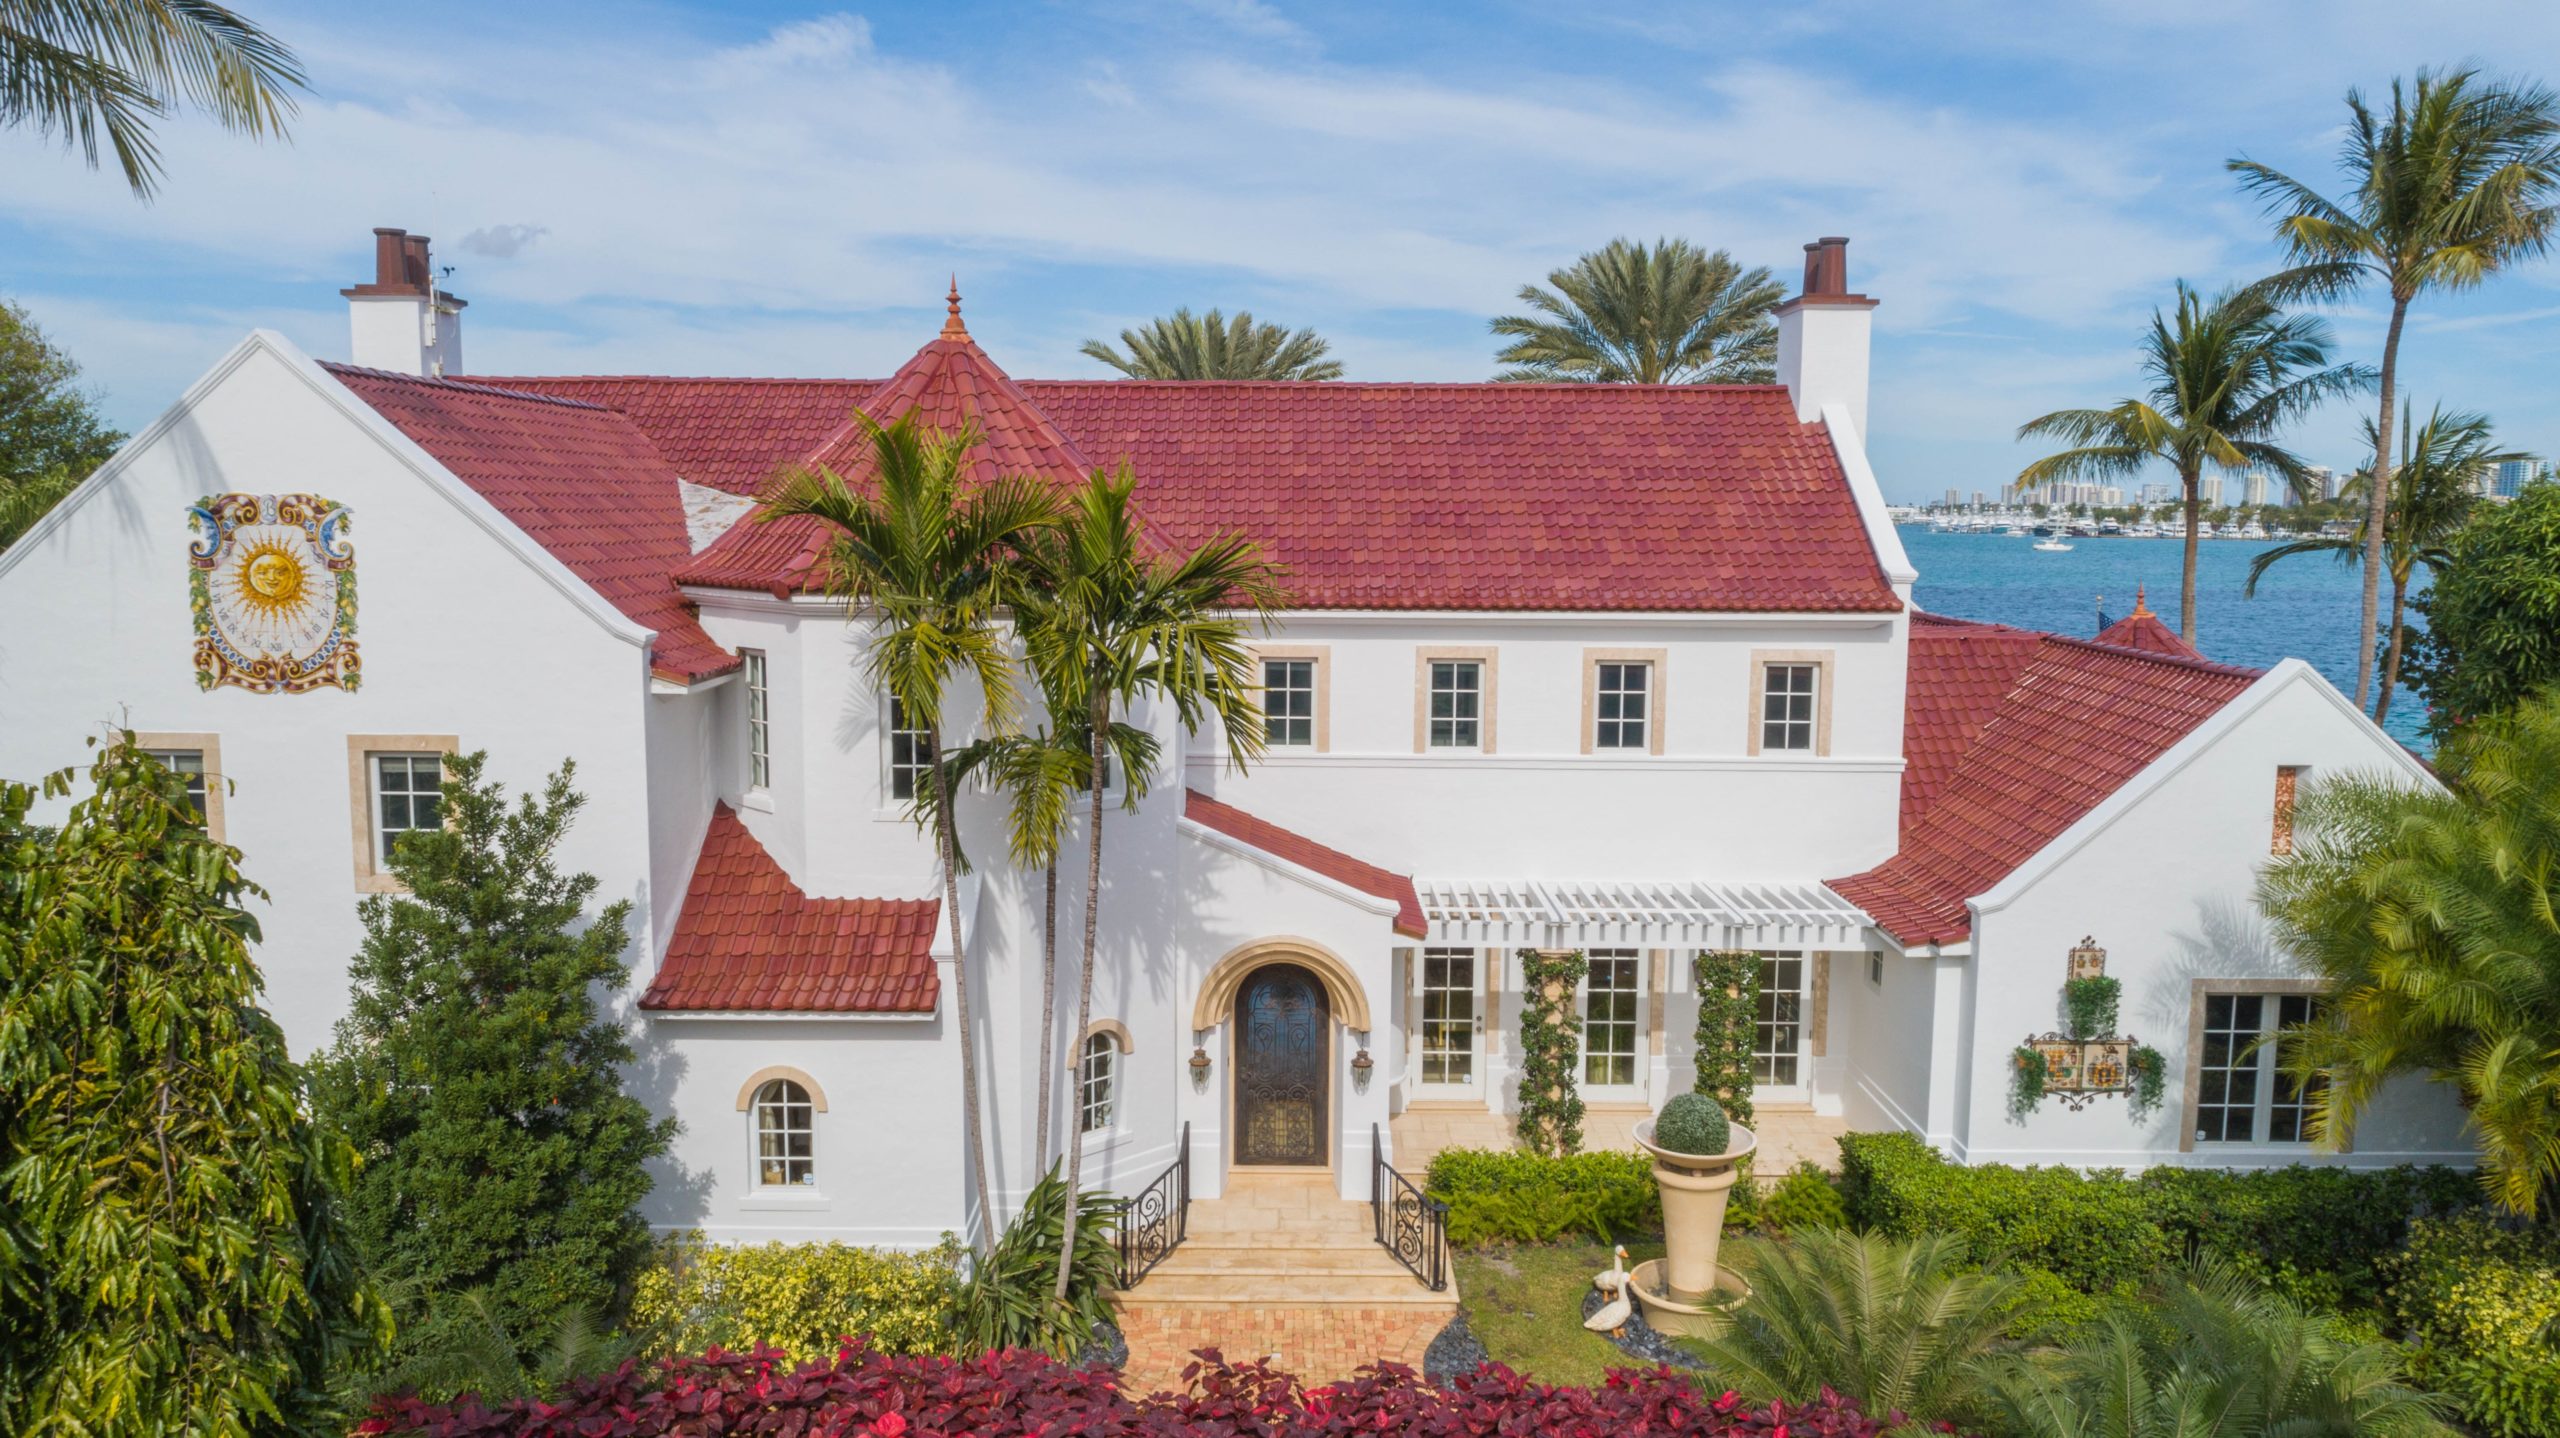 Southeast Florida Private Residence Ludowici Roof Tile